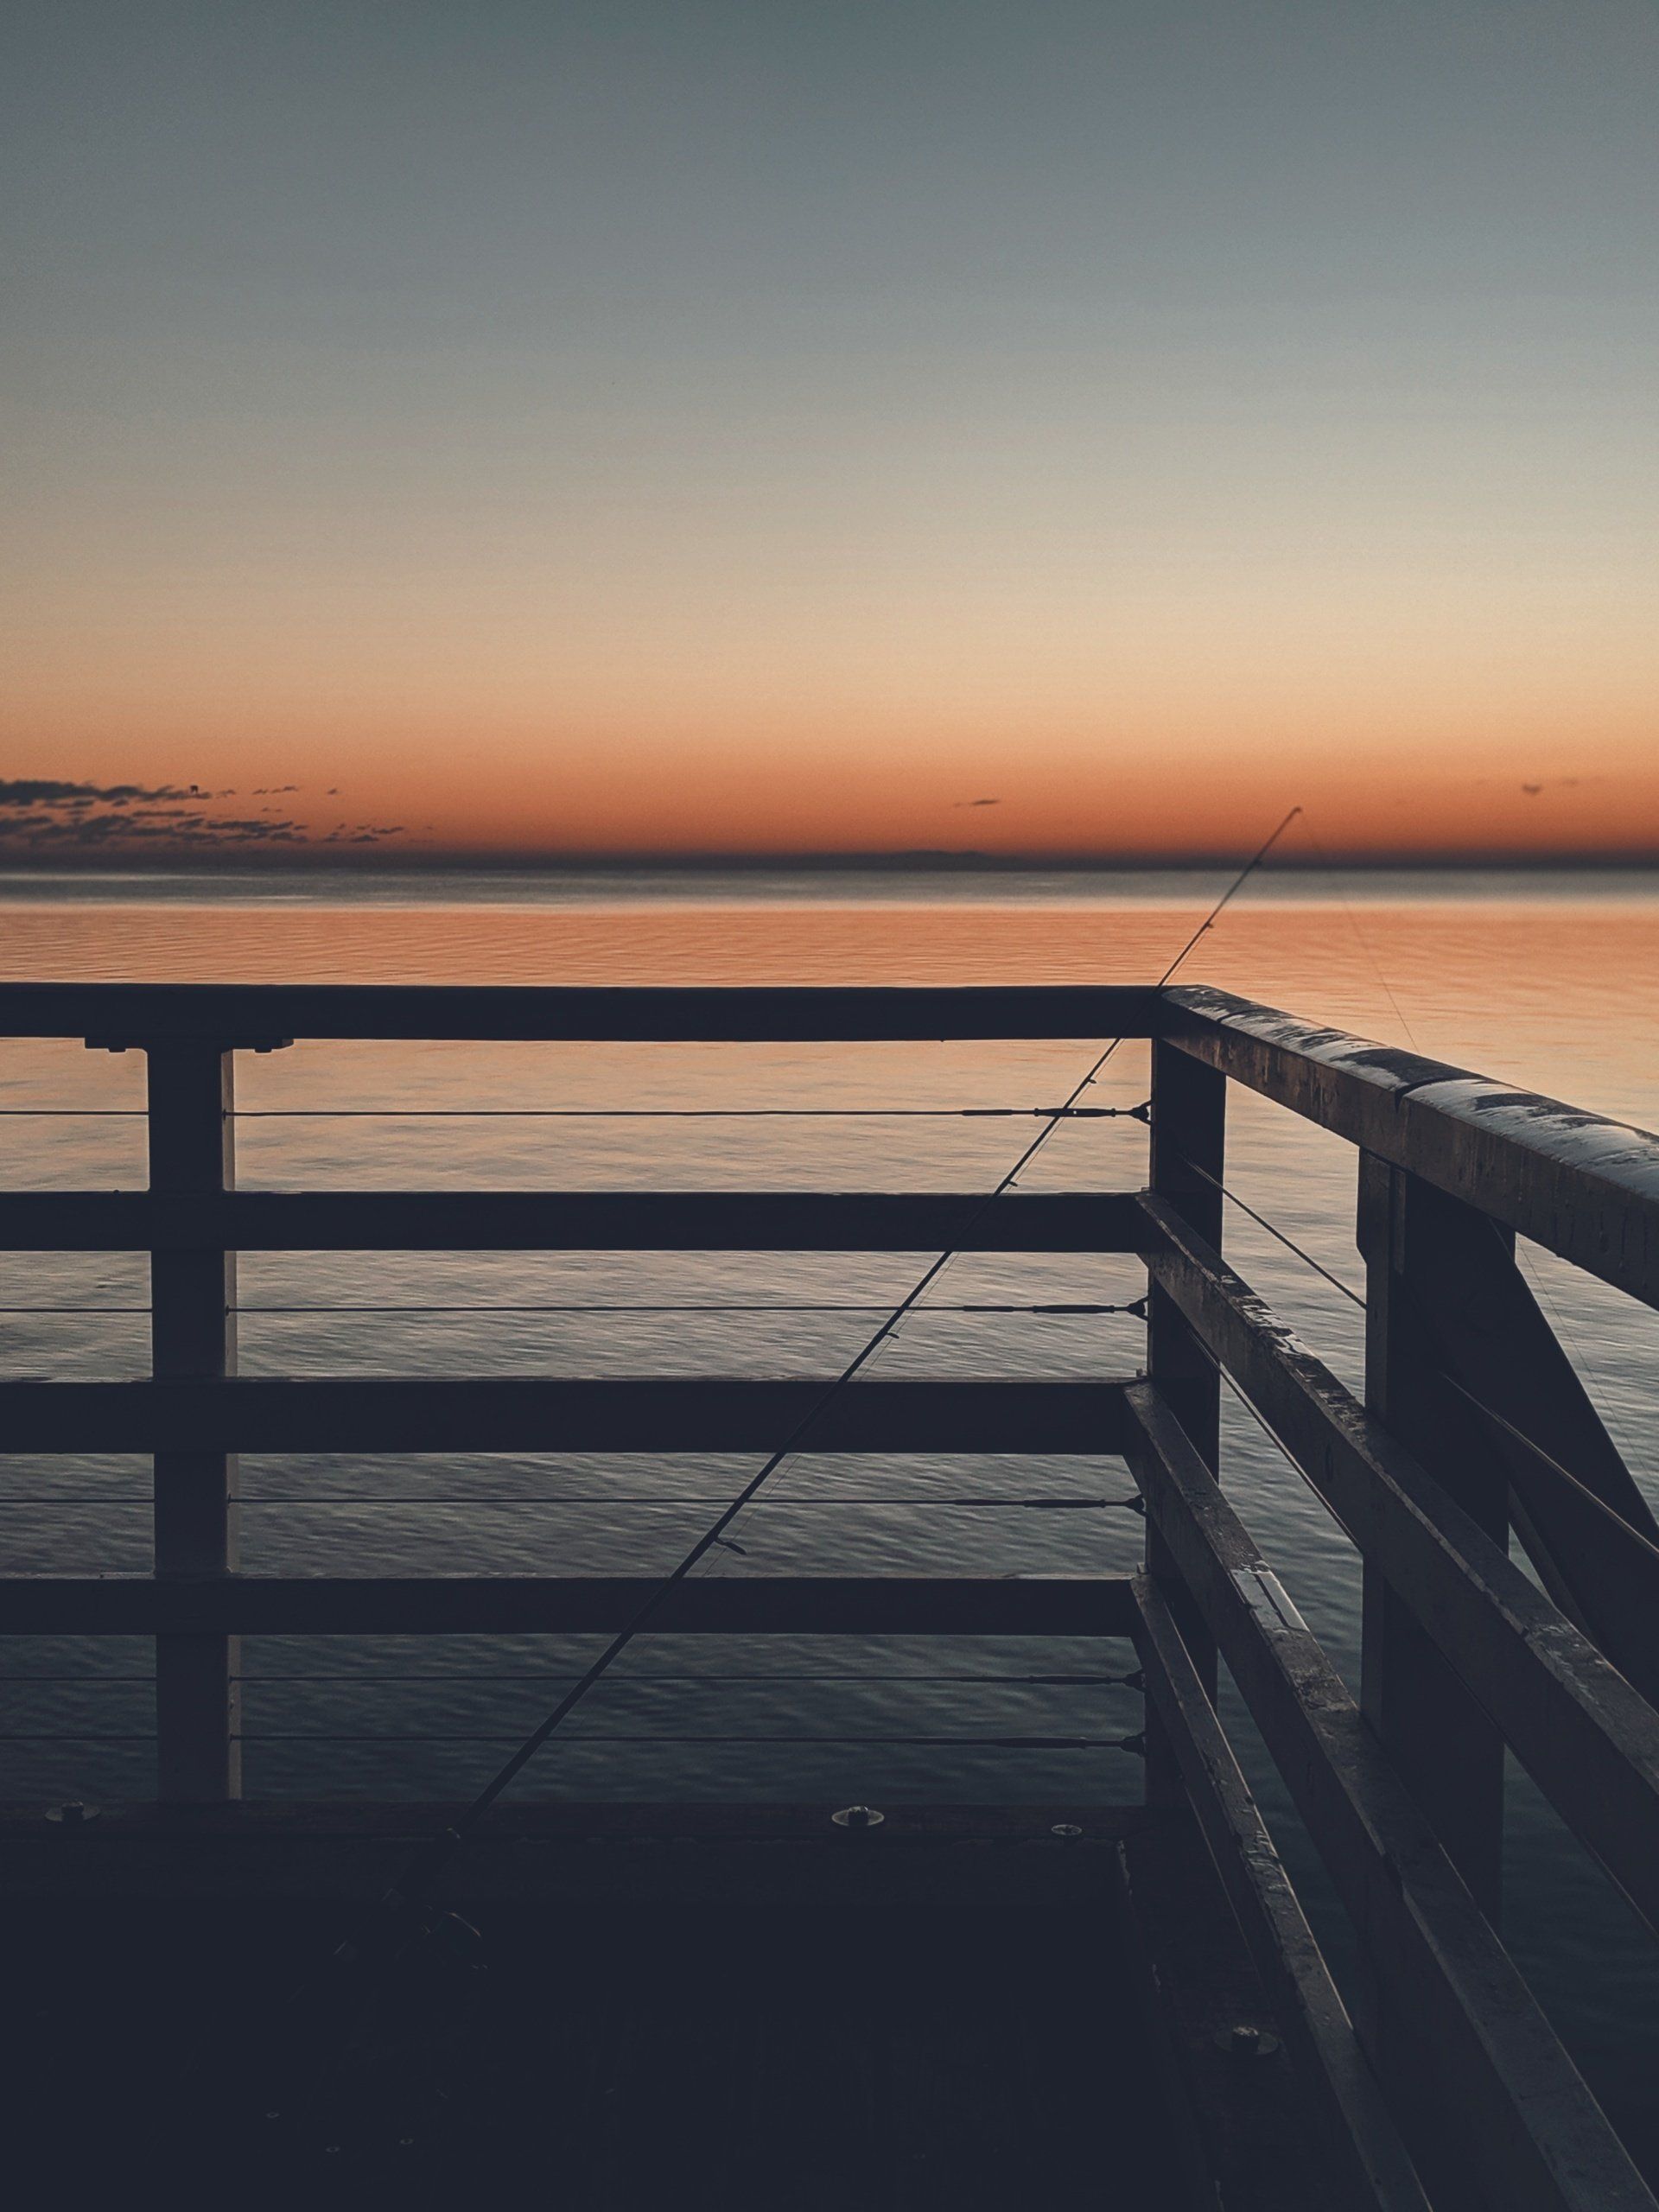 A pier with a fishing rod on it overlooking the ocean at sunset.